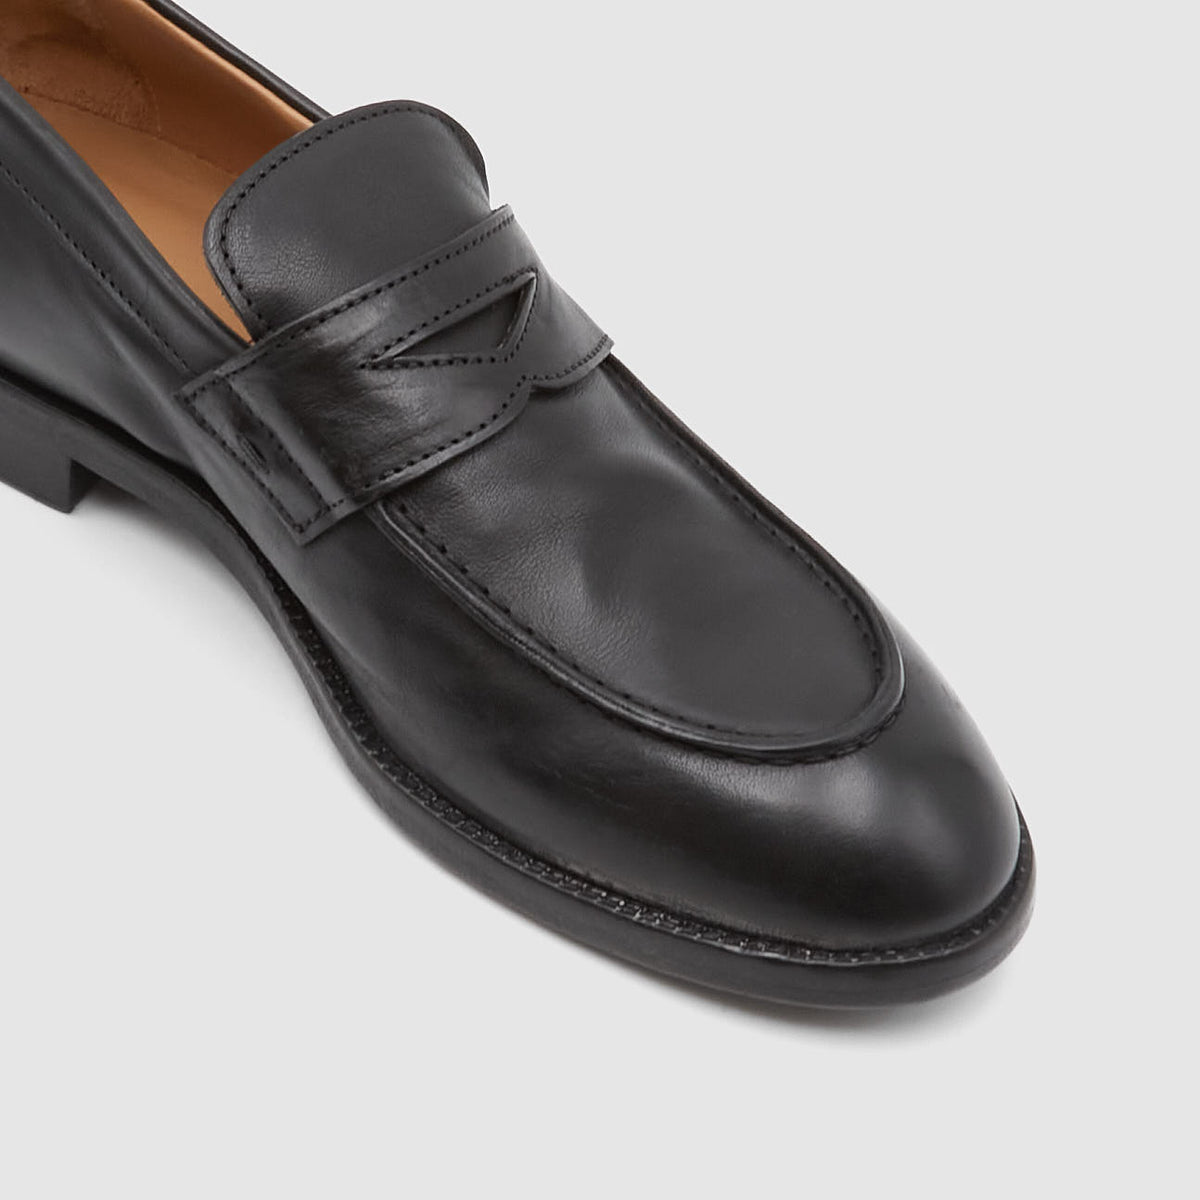 Moma Man Nappa Leather Penny Loafer